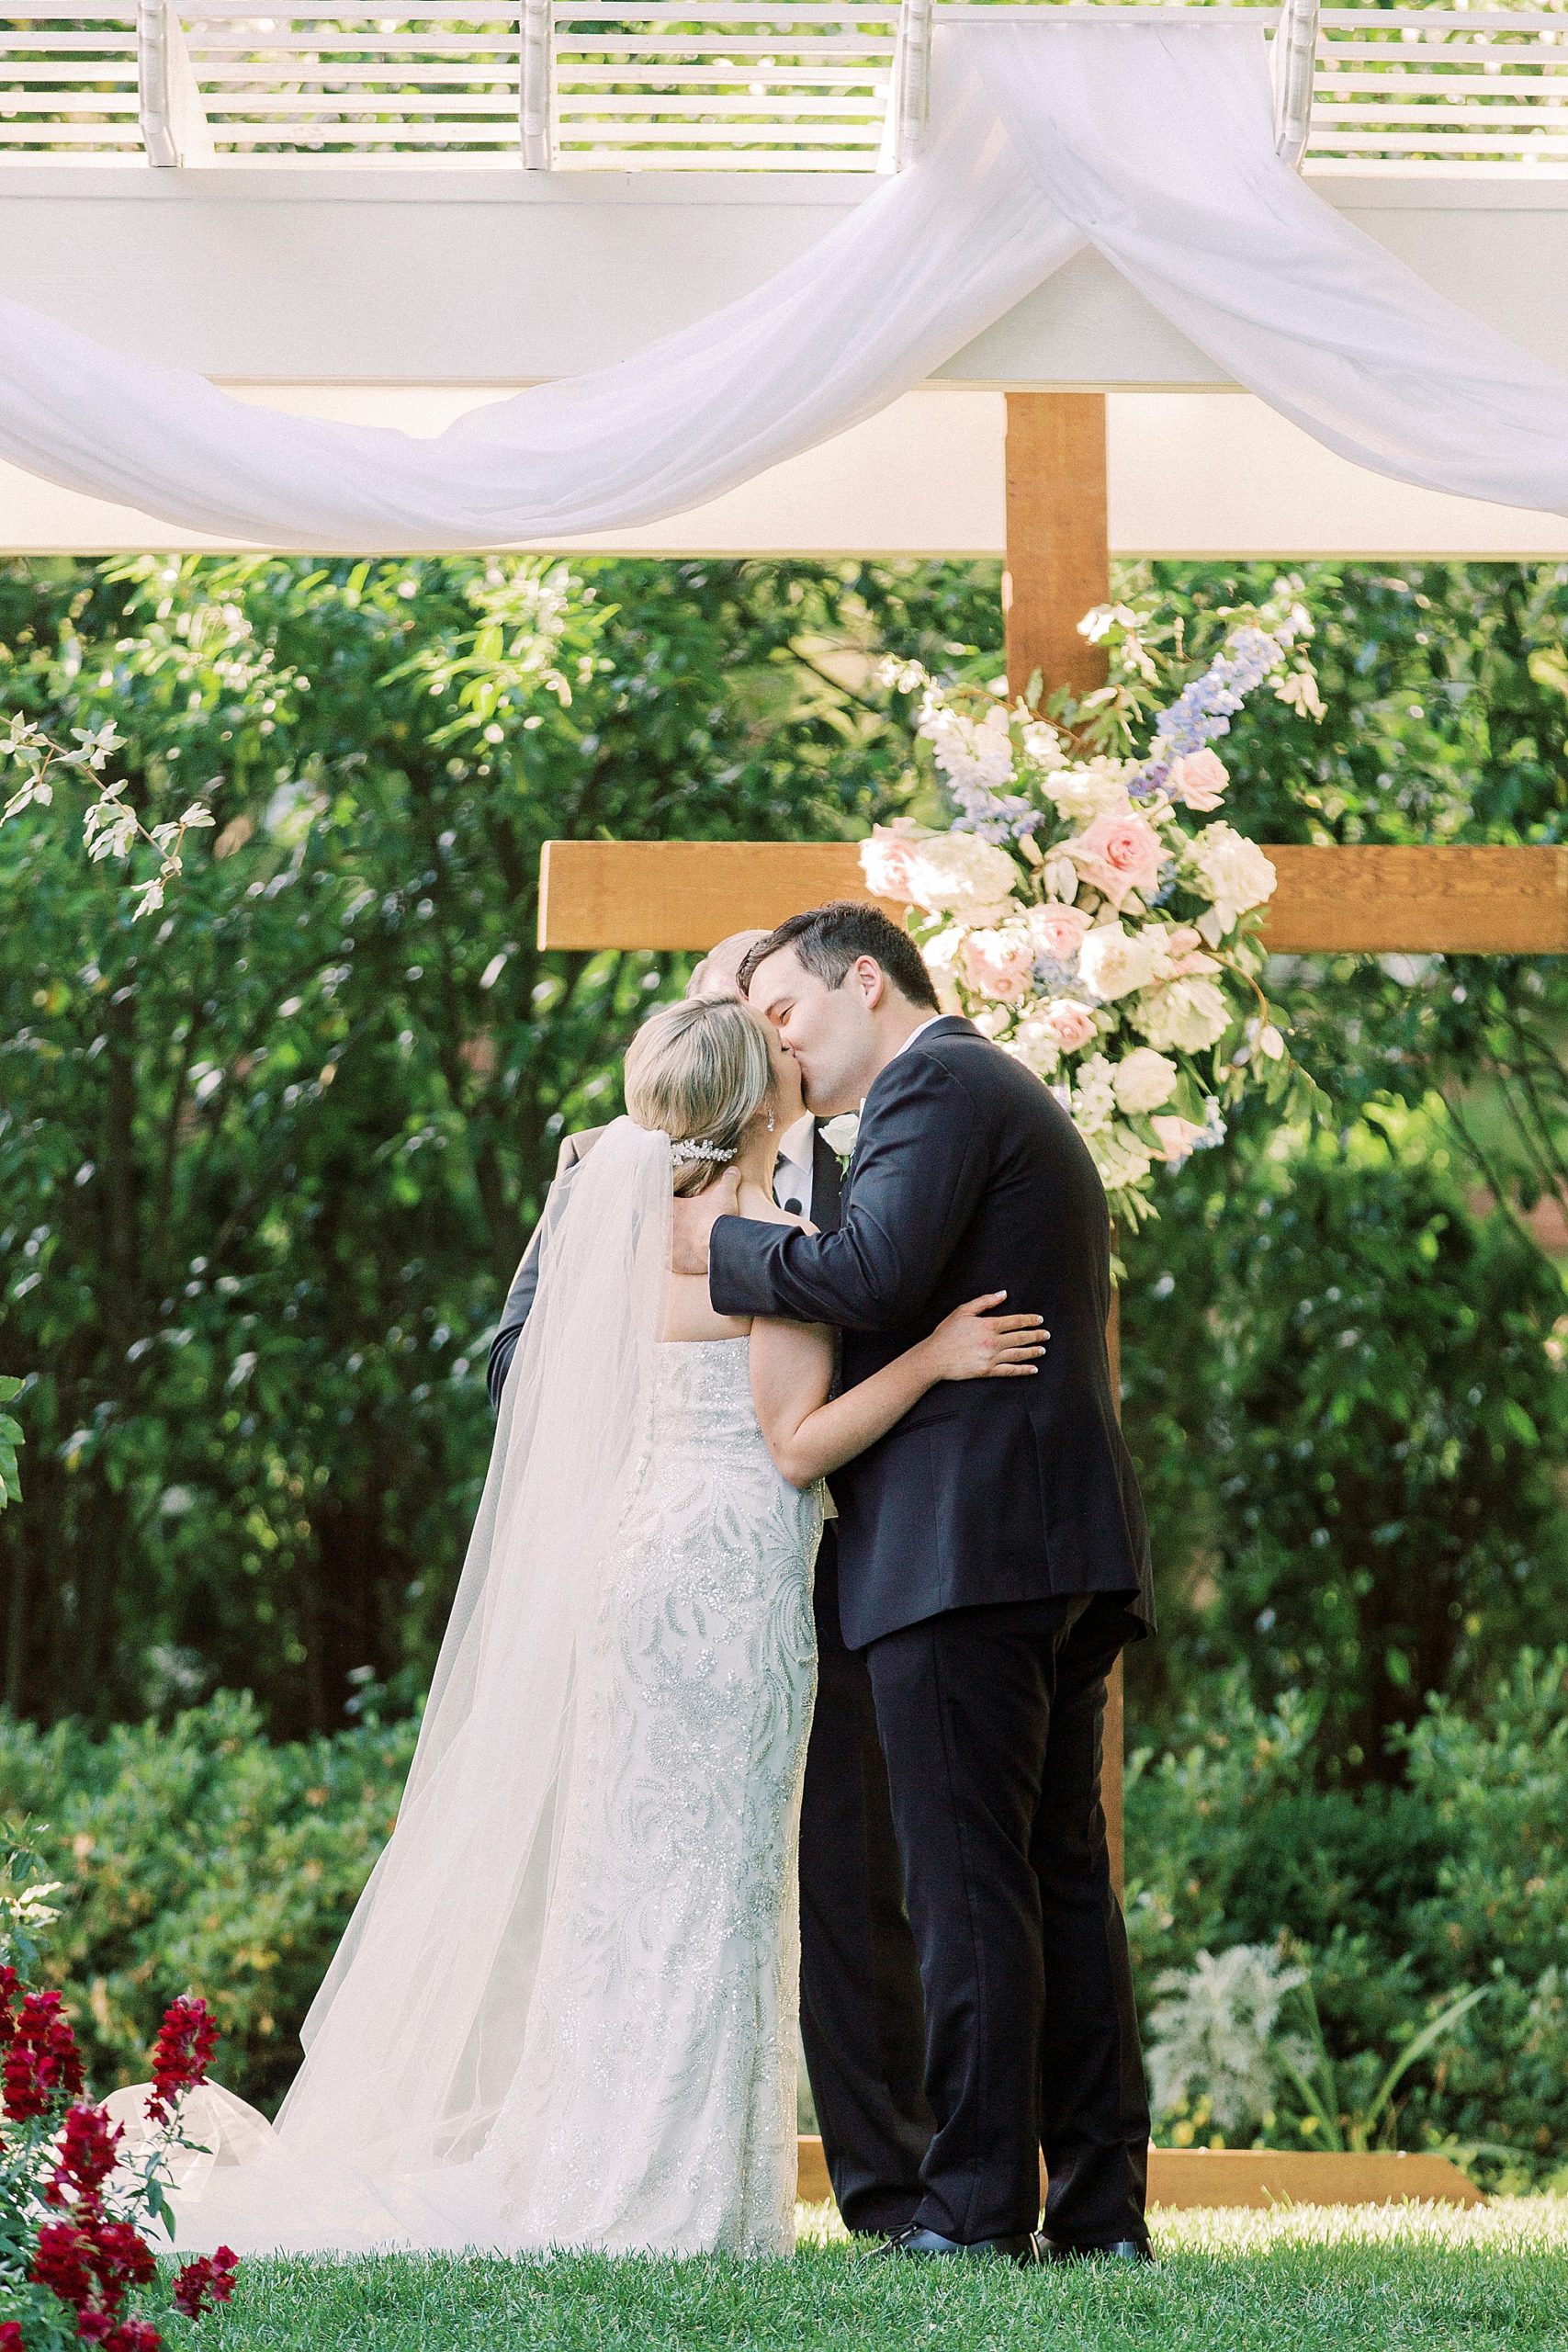 bride and groom kiss by wooden cross for outdoor wedding ceremony at Separk Mansion